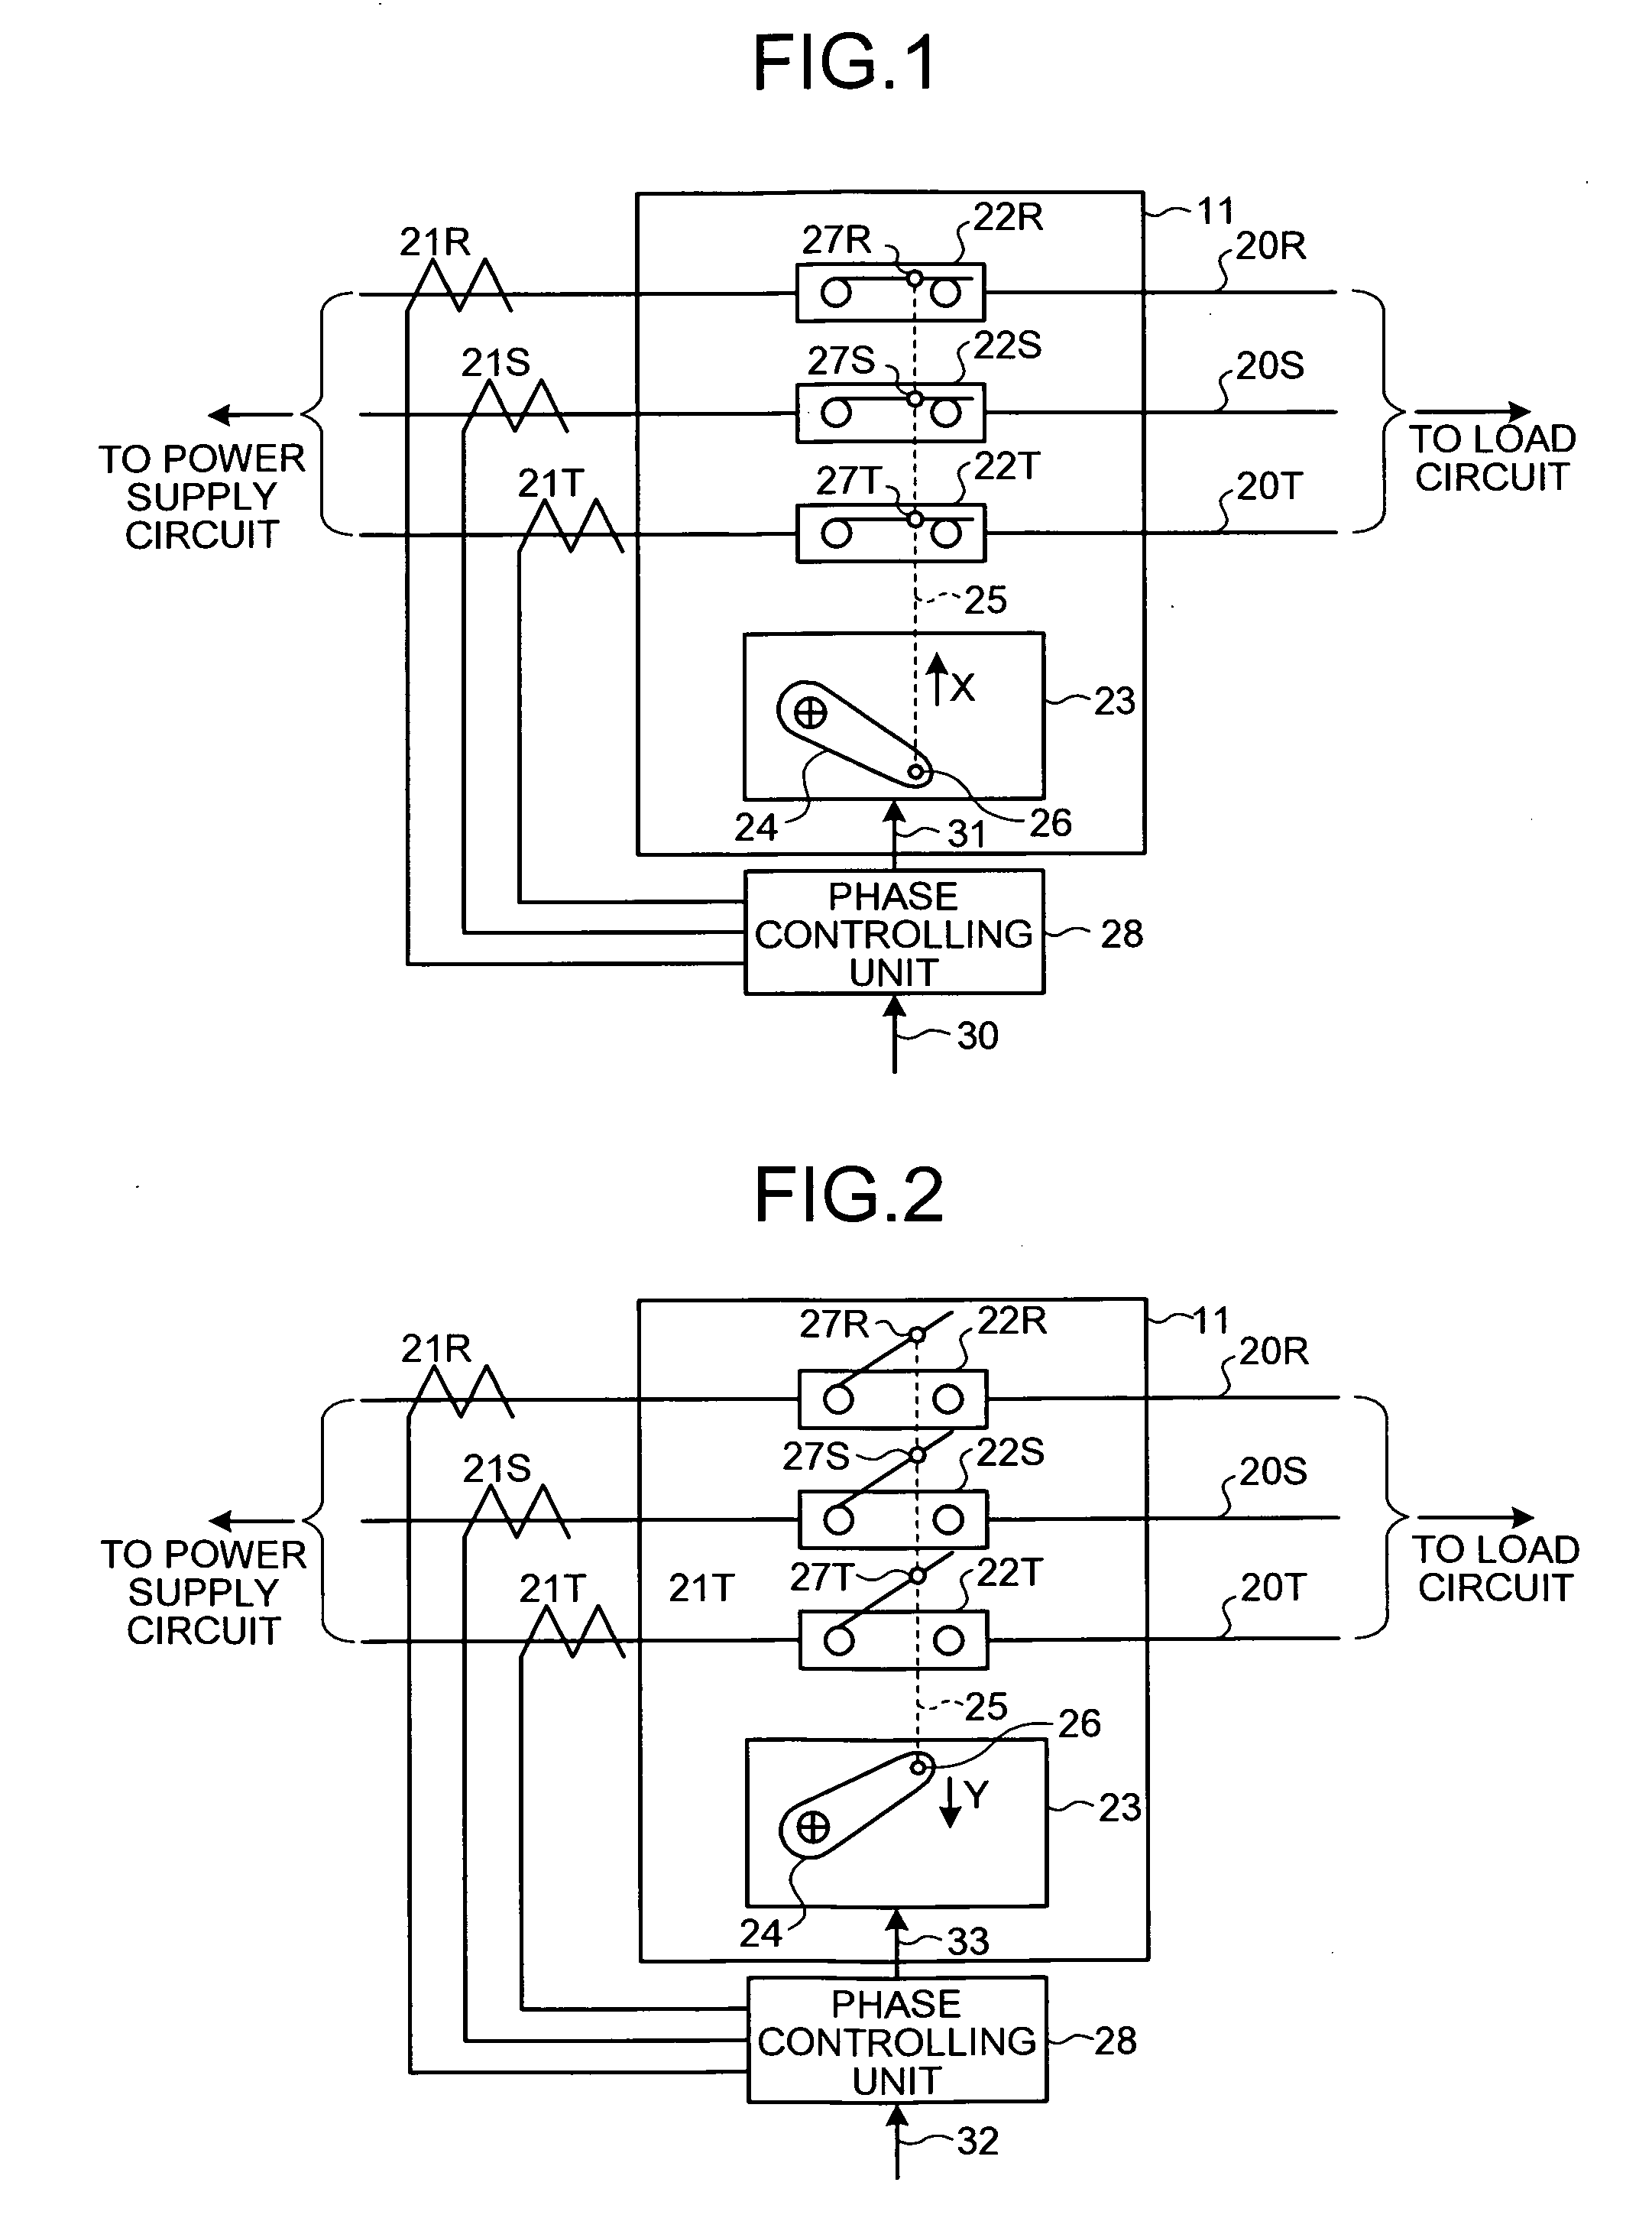 Power switching apparatus and method of controlling the same